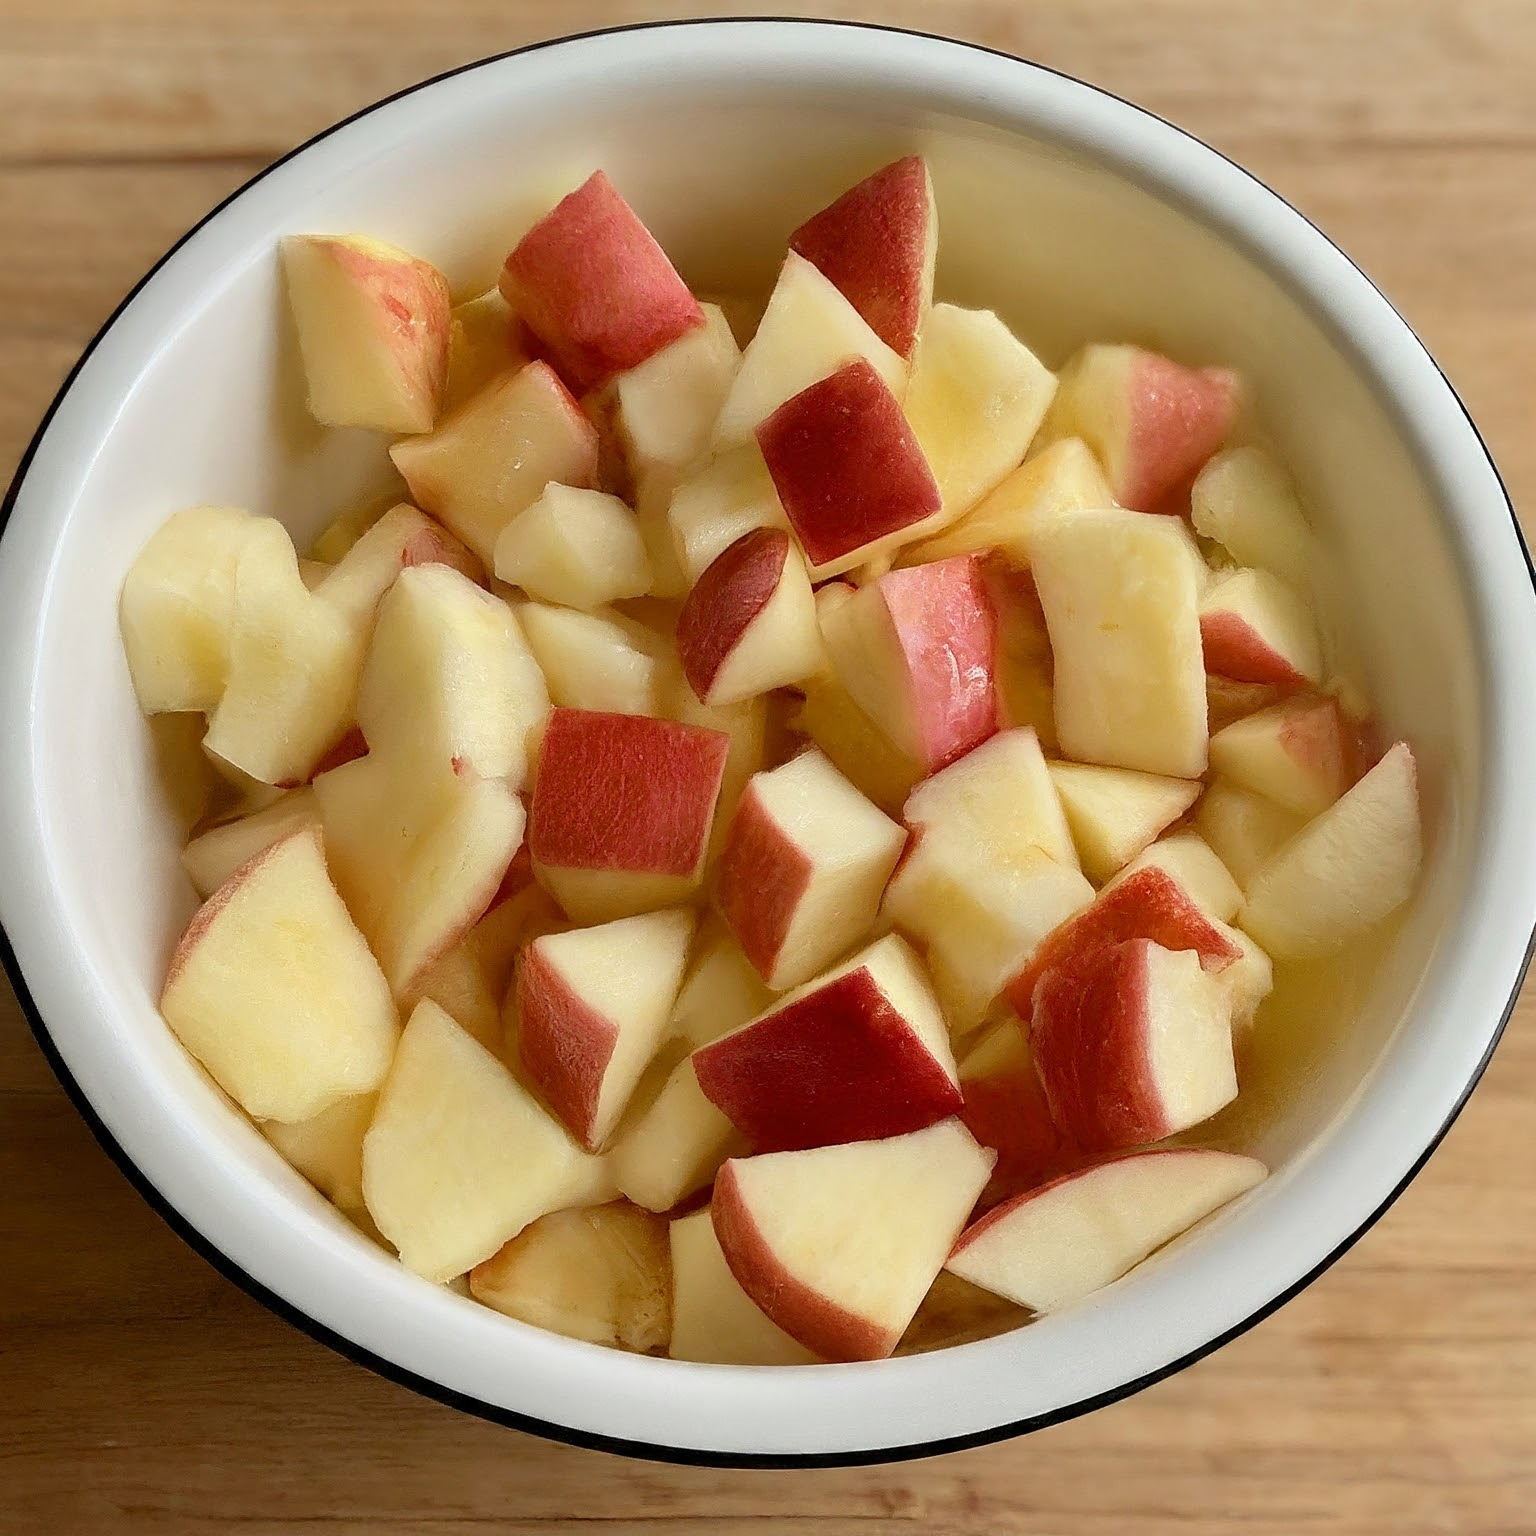 We add diced apples to her lunch and toss them with lemon juice.